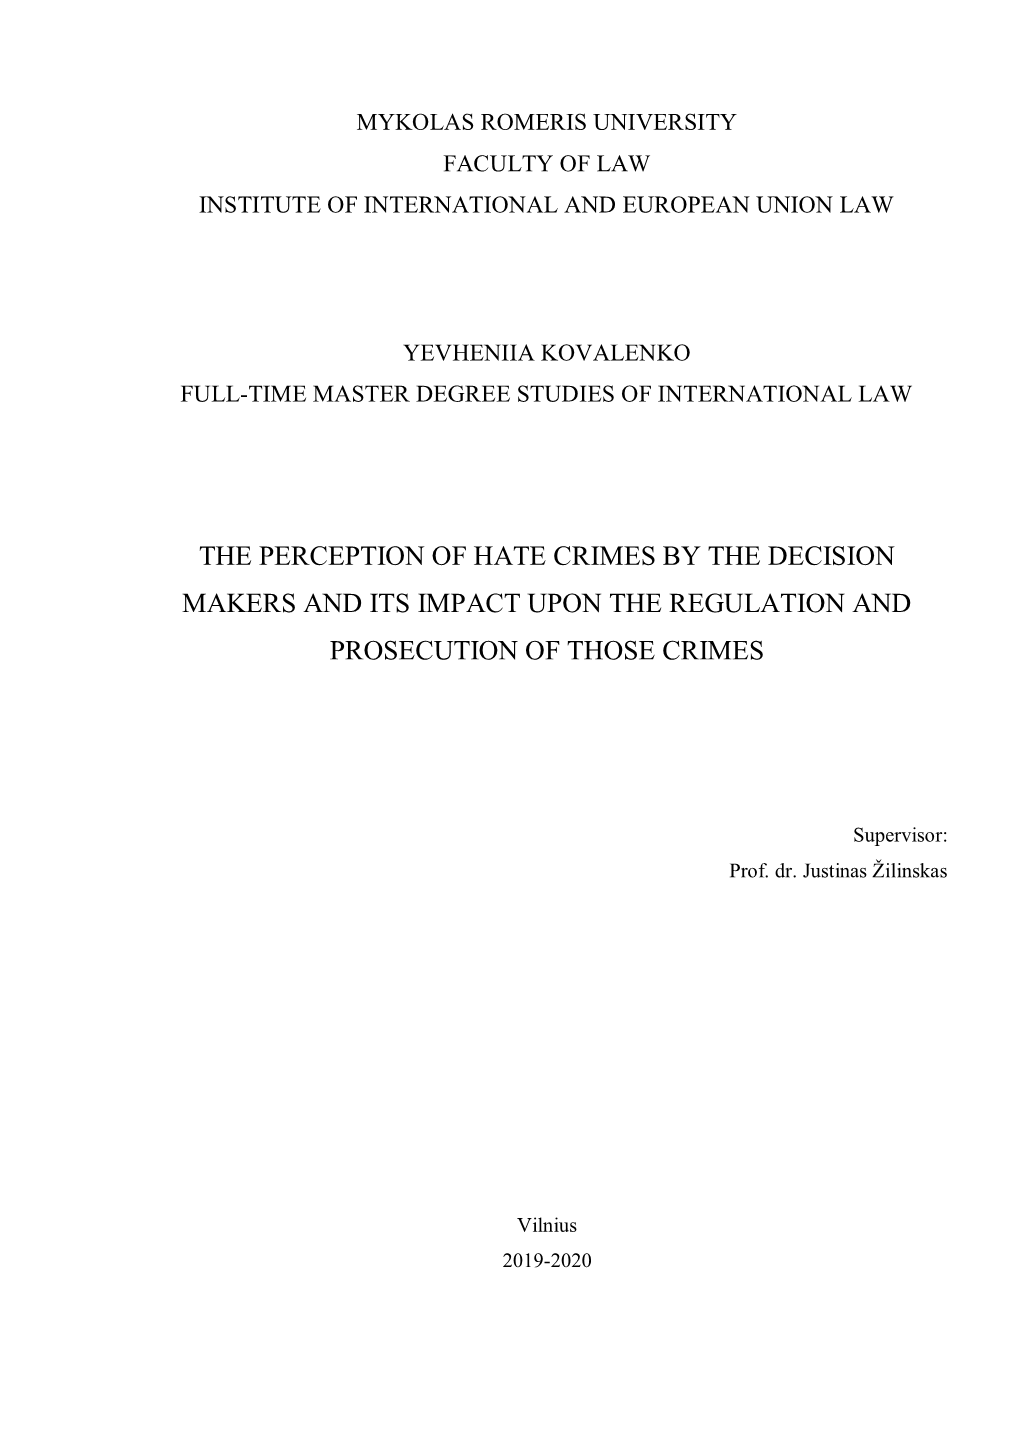 The Perception of Hate Crimes by the Decision Makers and Its Impact Upon the Regulation and Prosecution of Those Crimes